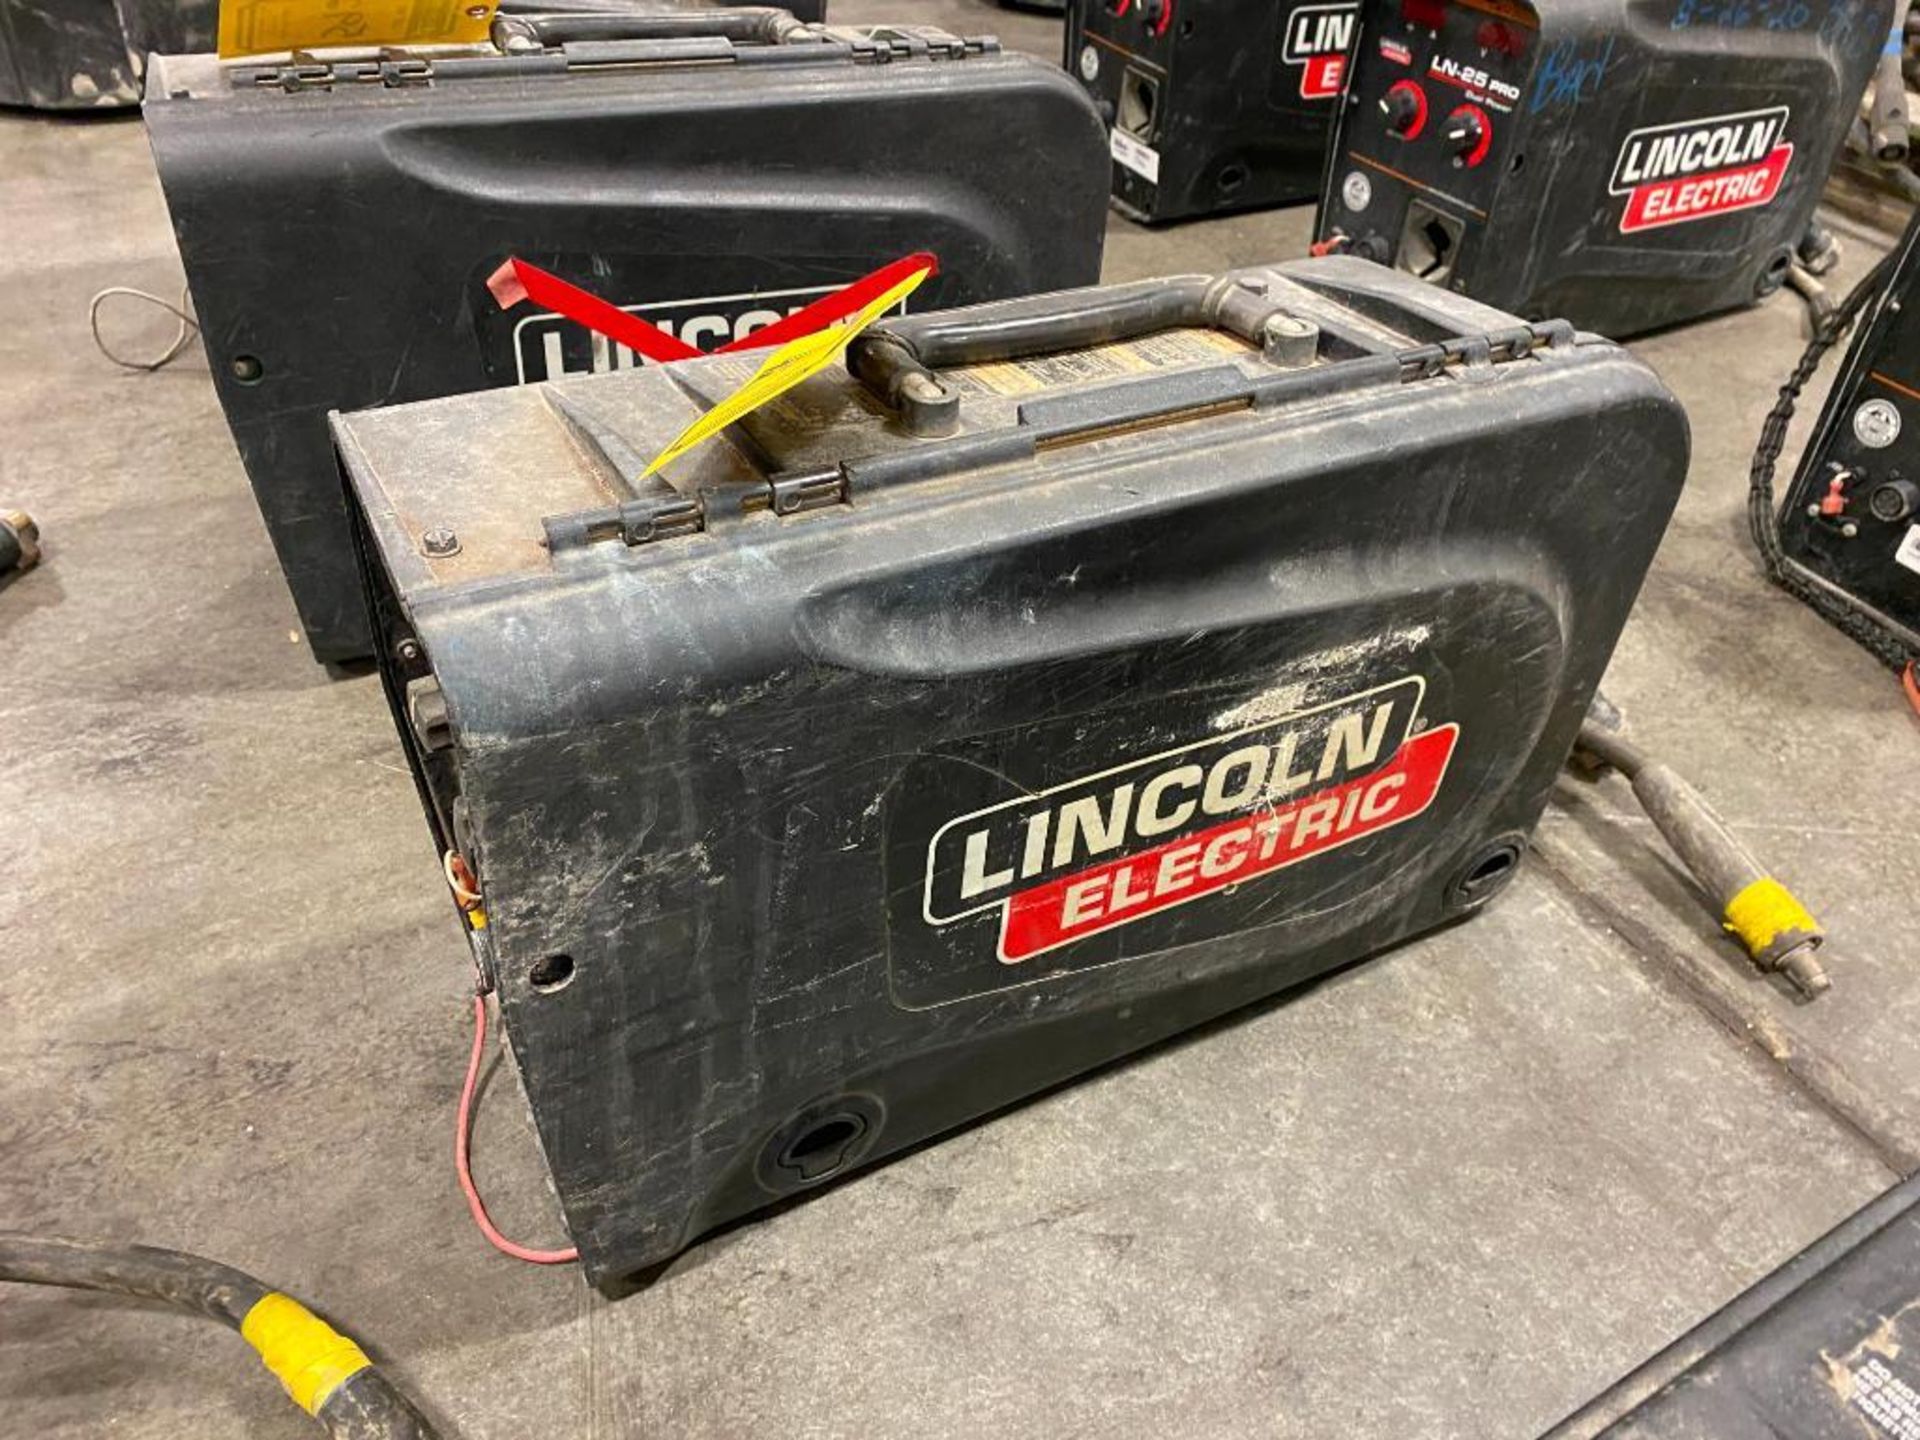 Lincoln LN-25 Pro Dual Power Wire Feeder Suitcase Welder, S/N U11708008744 - Image 2 of 3